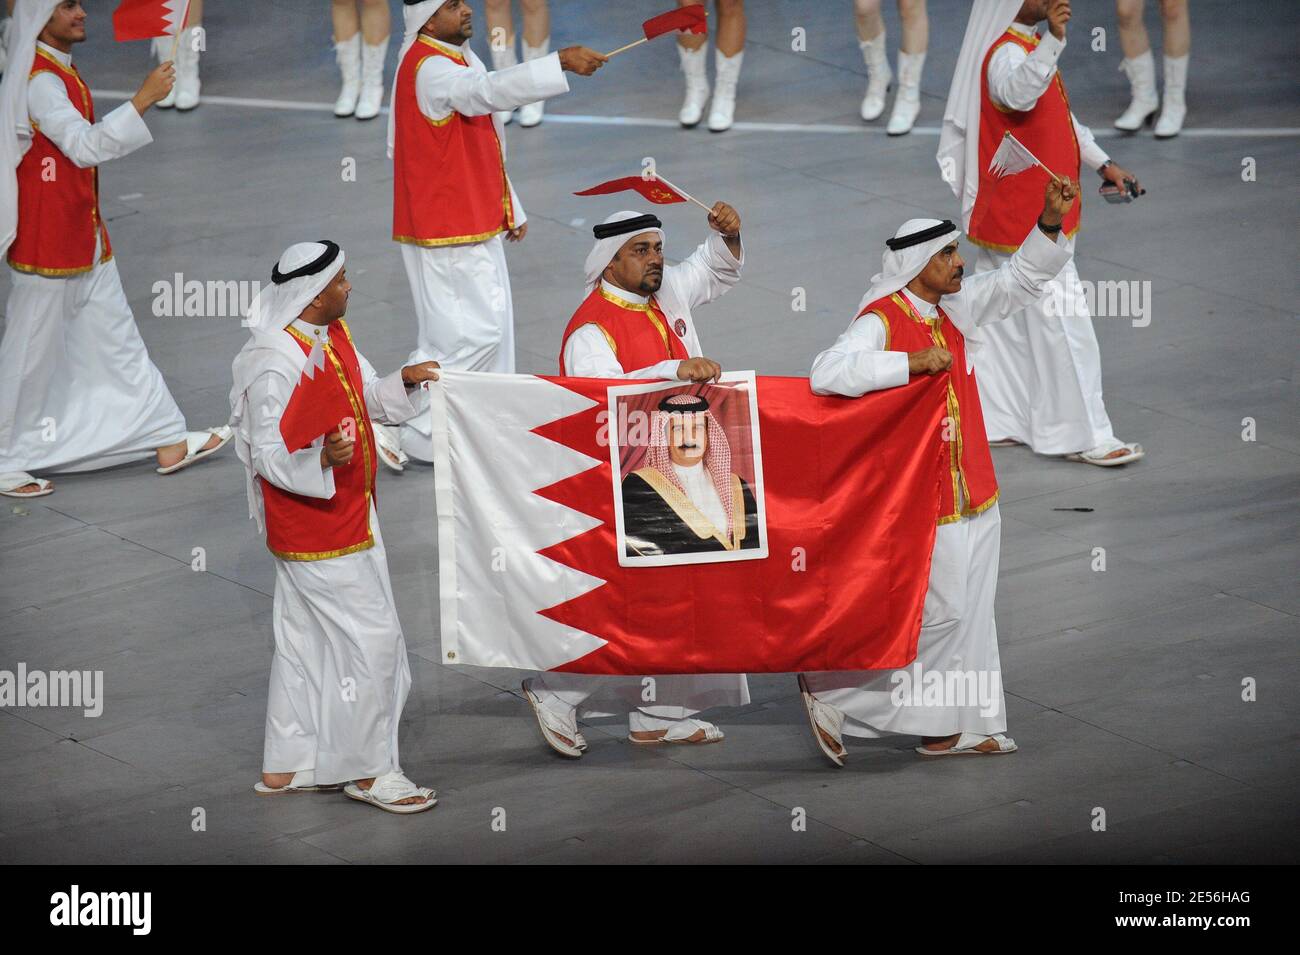 The Bahrein delegation during the Opening Ceremony for the 2008 Beijing Summer Olympics at the National Stadium in Beijing, China on August 8, 2008. Photo by Gouhier-Hahn-Nebinger/ABACAPRESS.COM Stock Photo